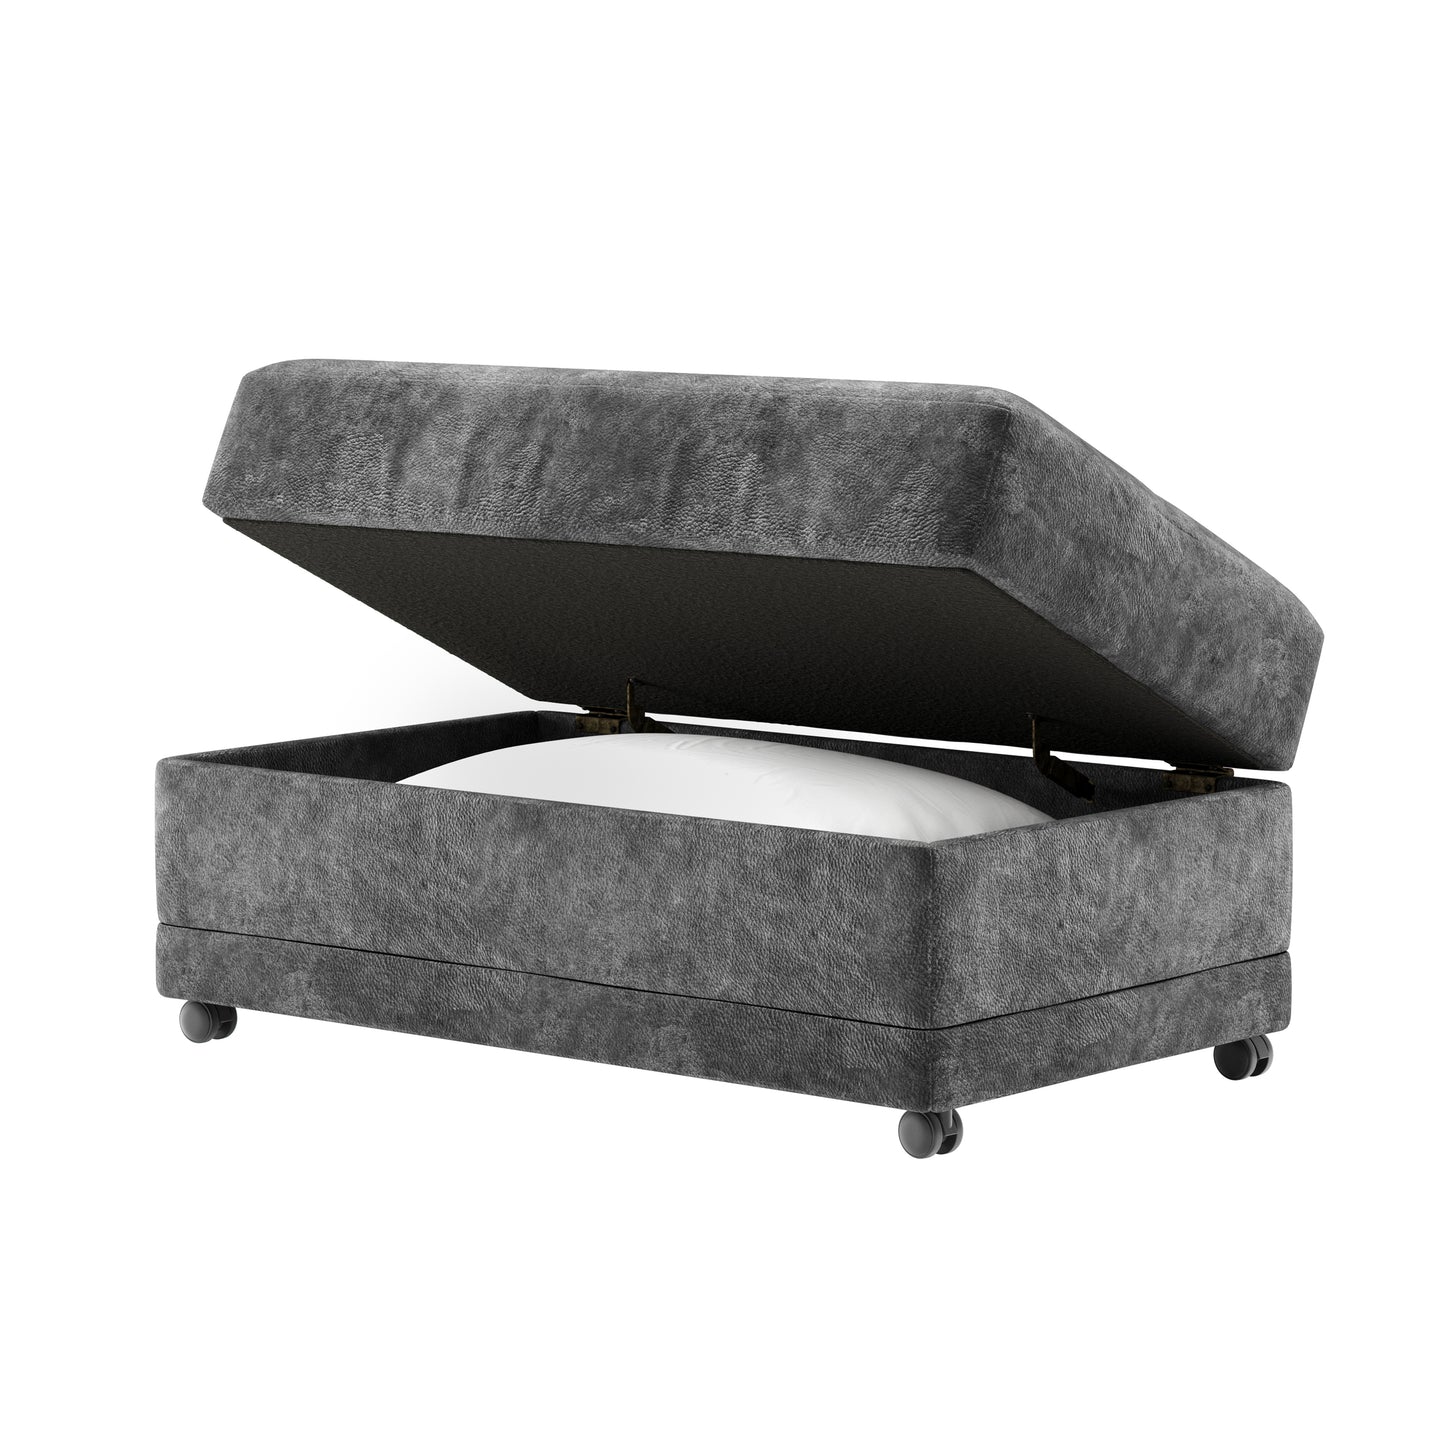 Bonarse Fabric Cuddle Chair with Storage Ottoman with Casters in Wonderland Slate